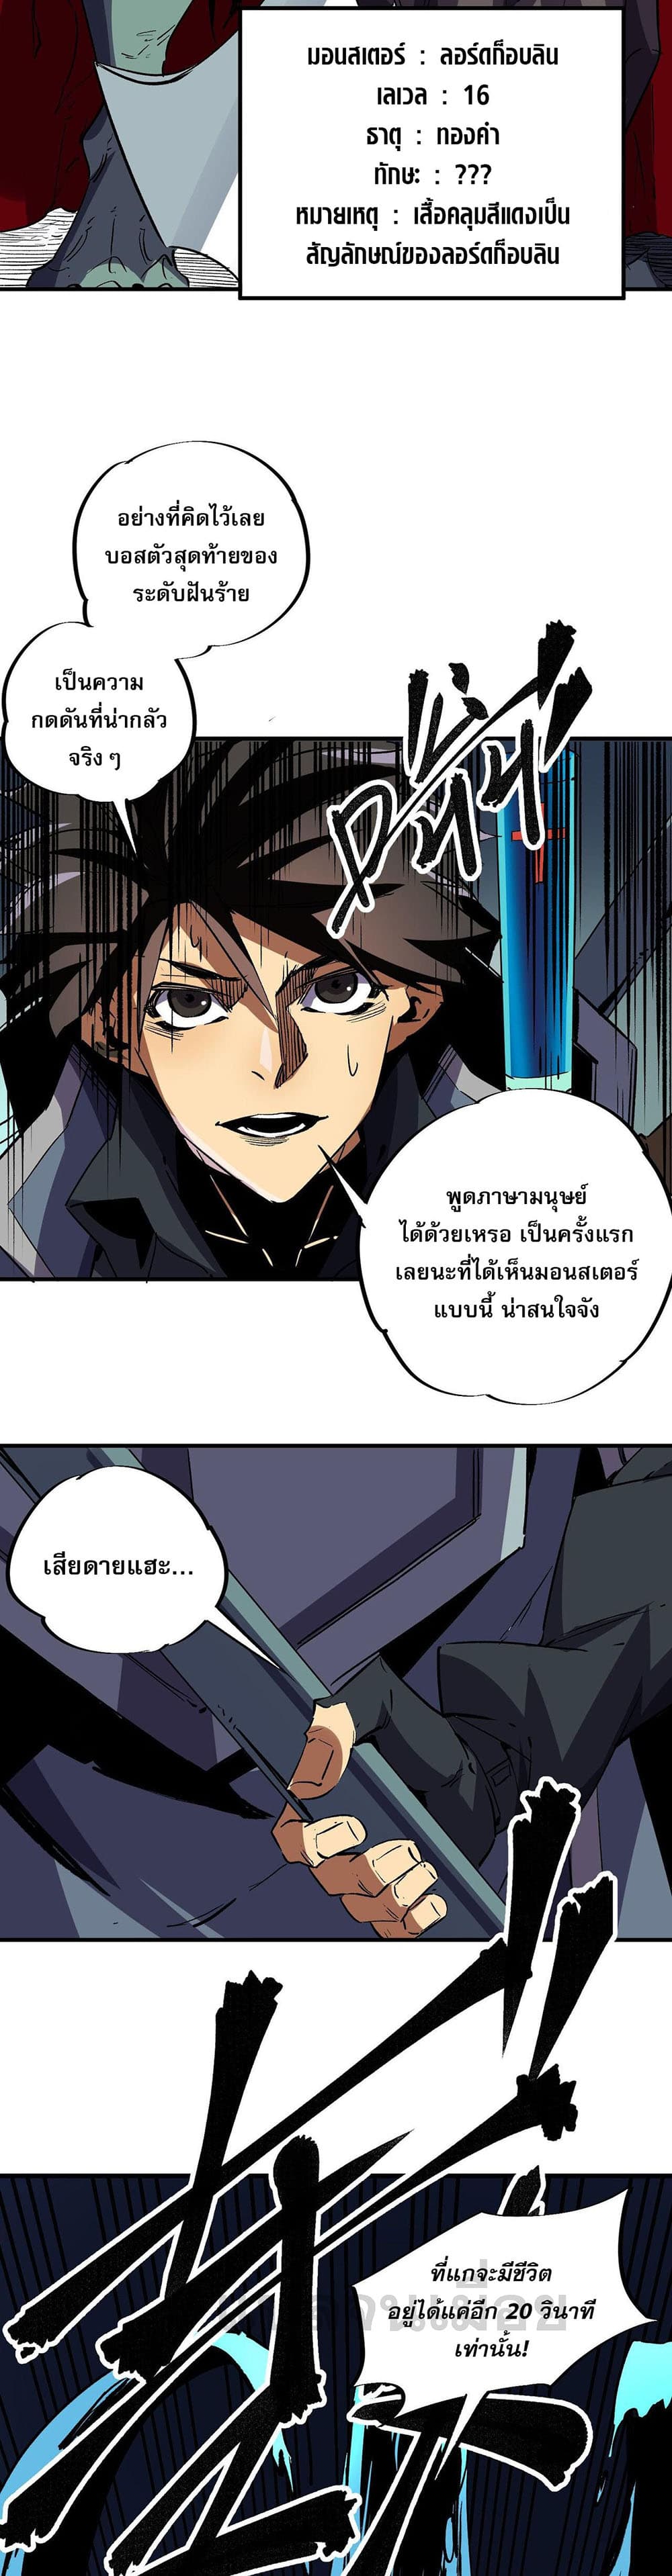 Job Changing for the Entire Population: The Jobless Me Will Terminate the Gods ฉันคือผู้เล่นไร้อาชีพที่สังหารเหล่าเทพ 6-6